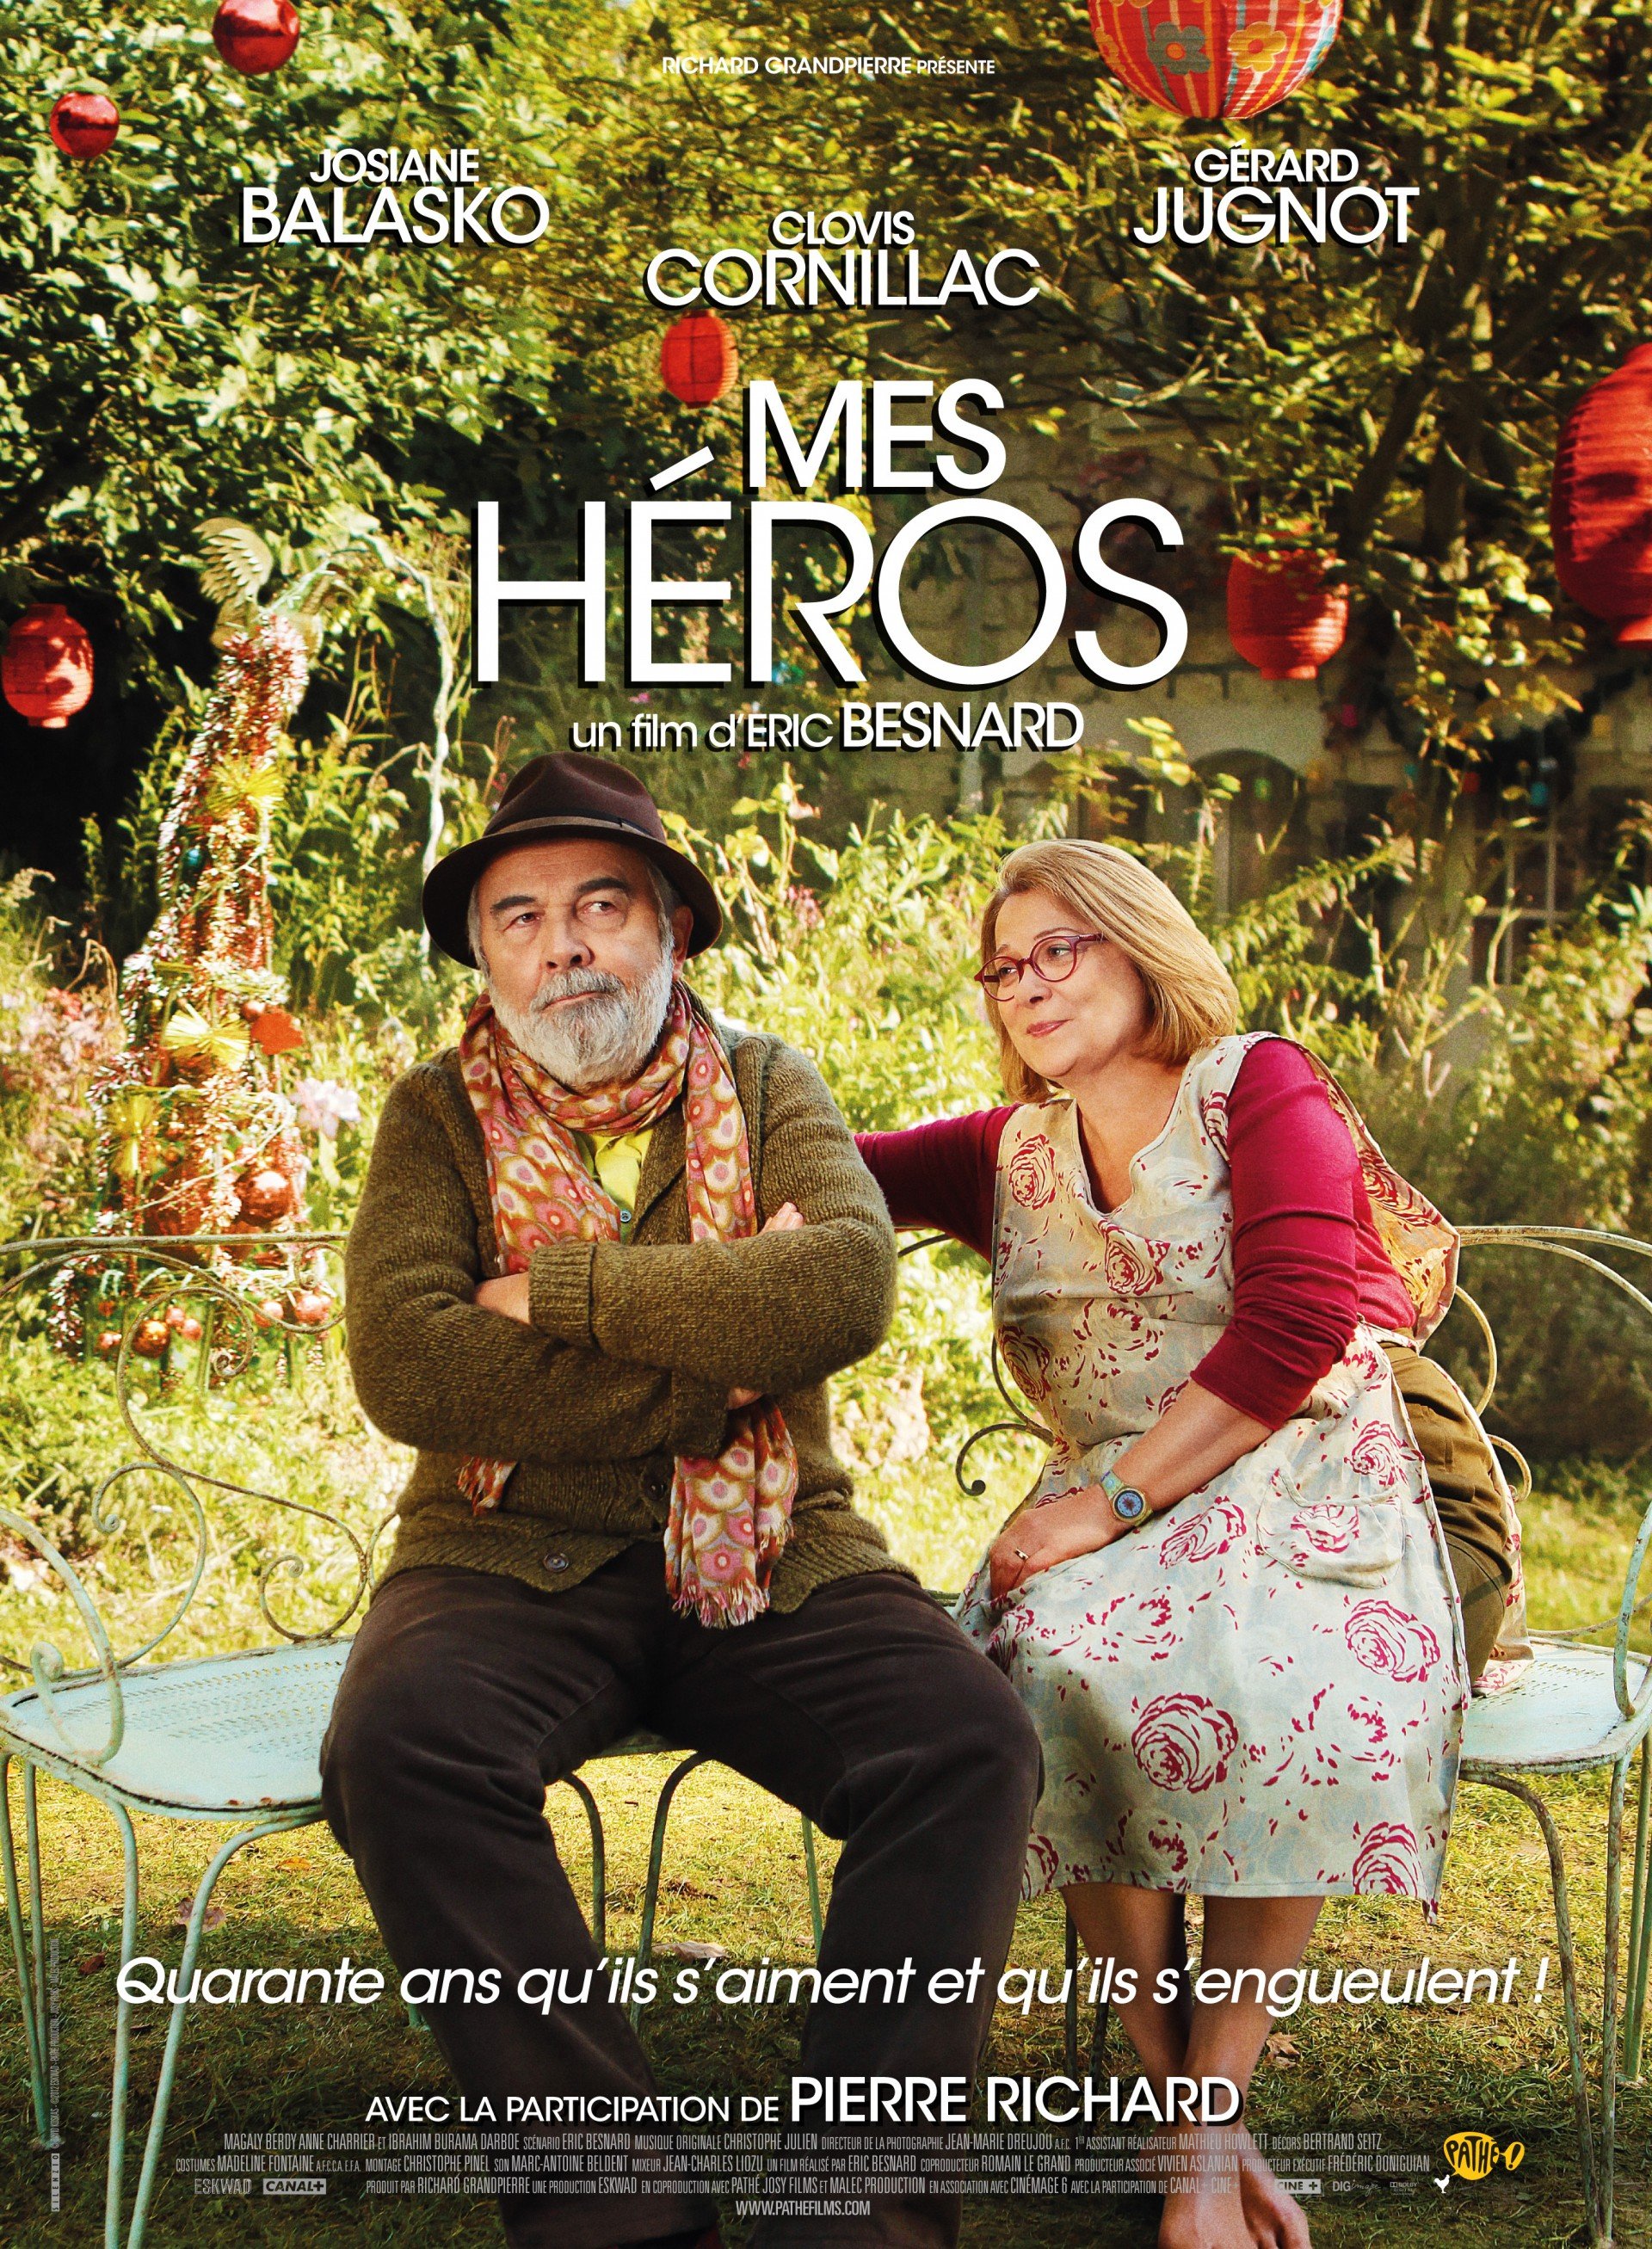 Poster of the movie Mes héros